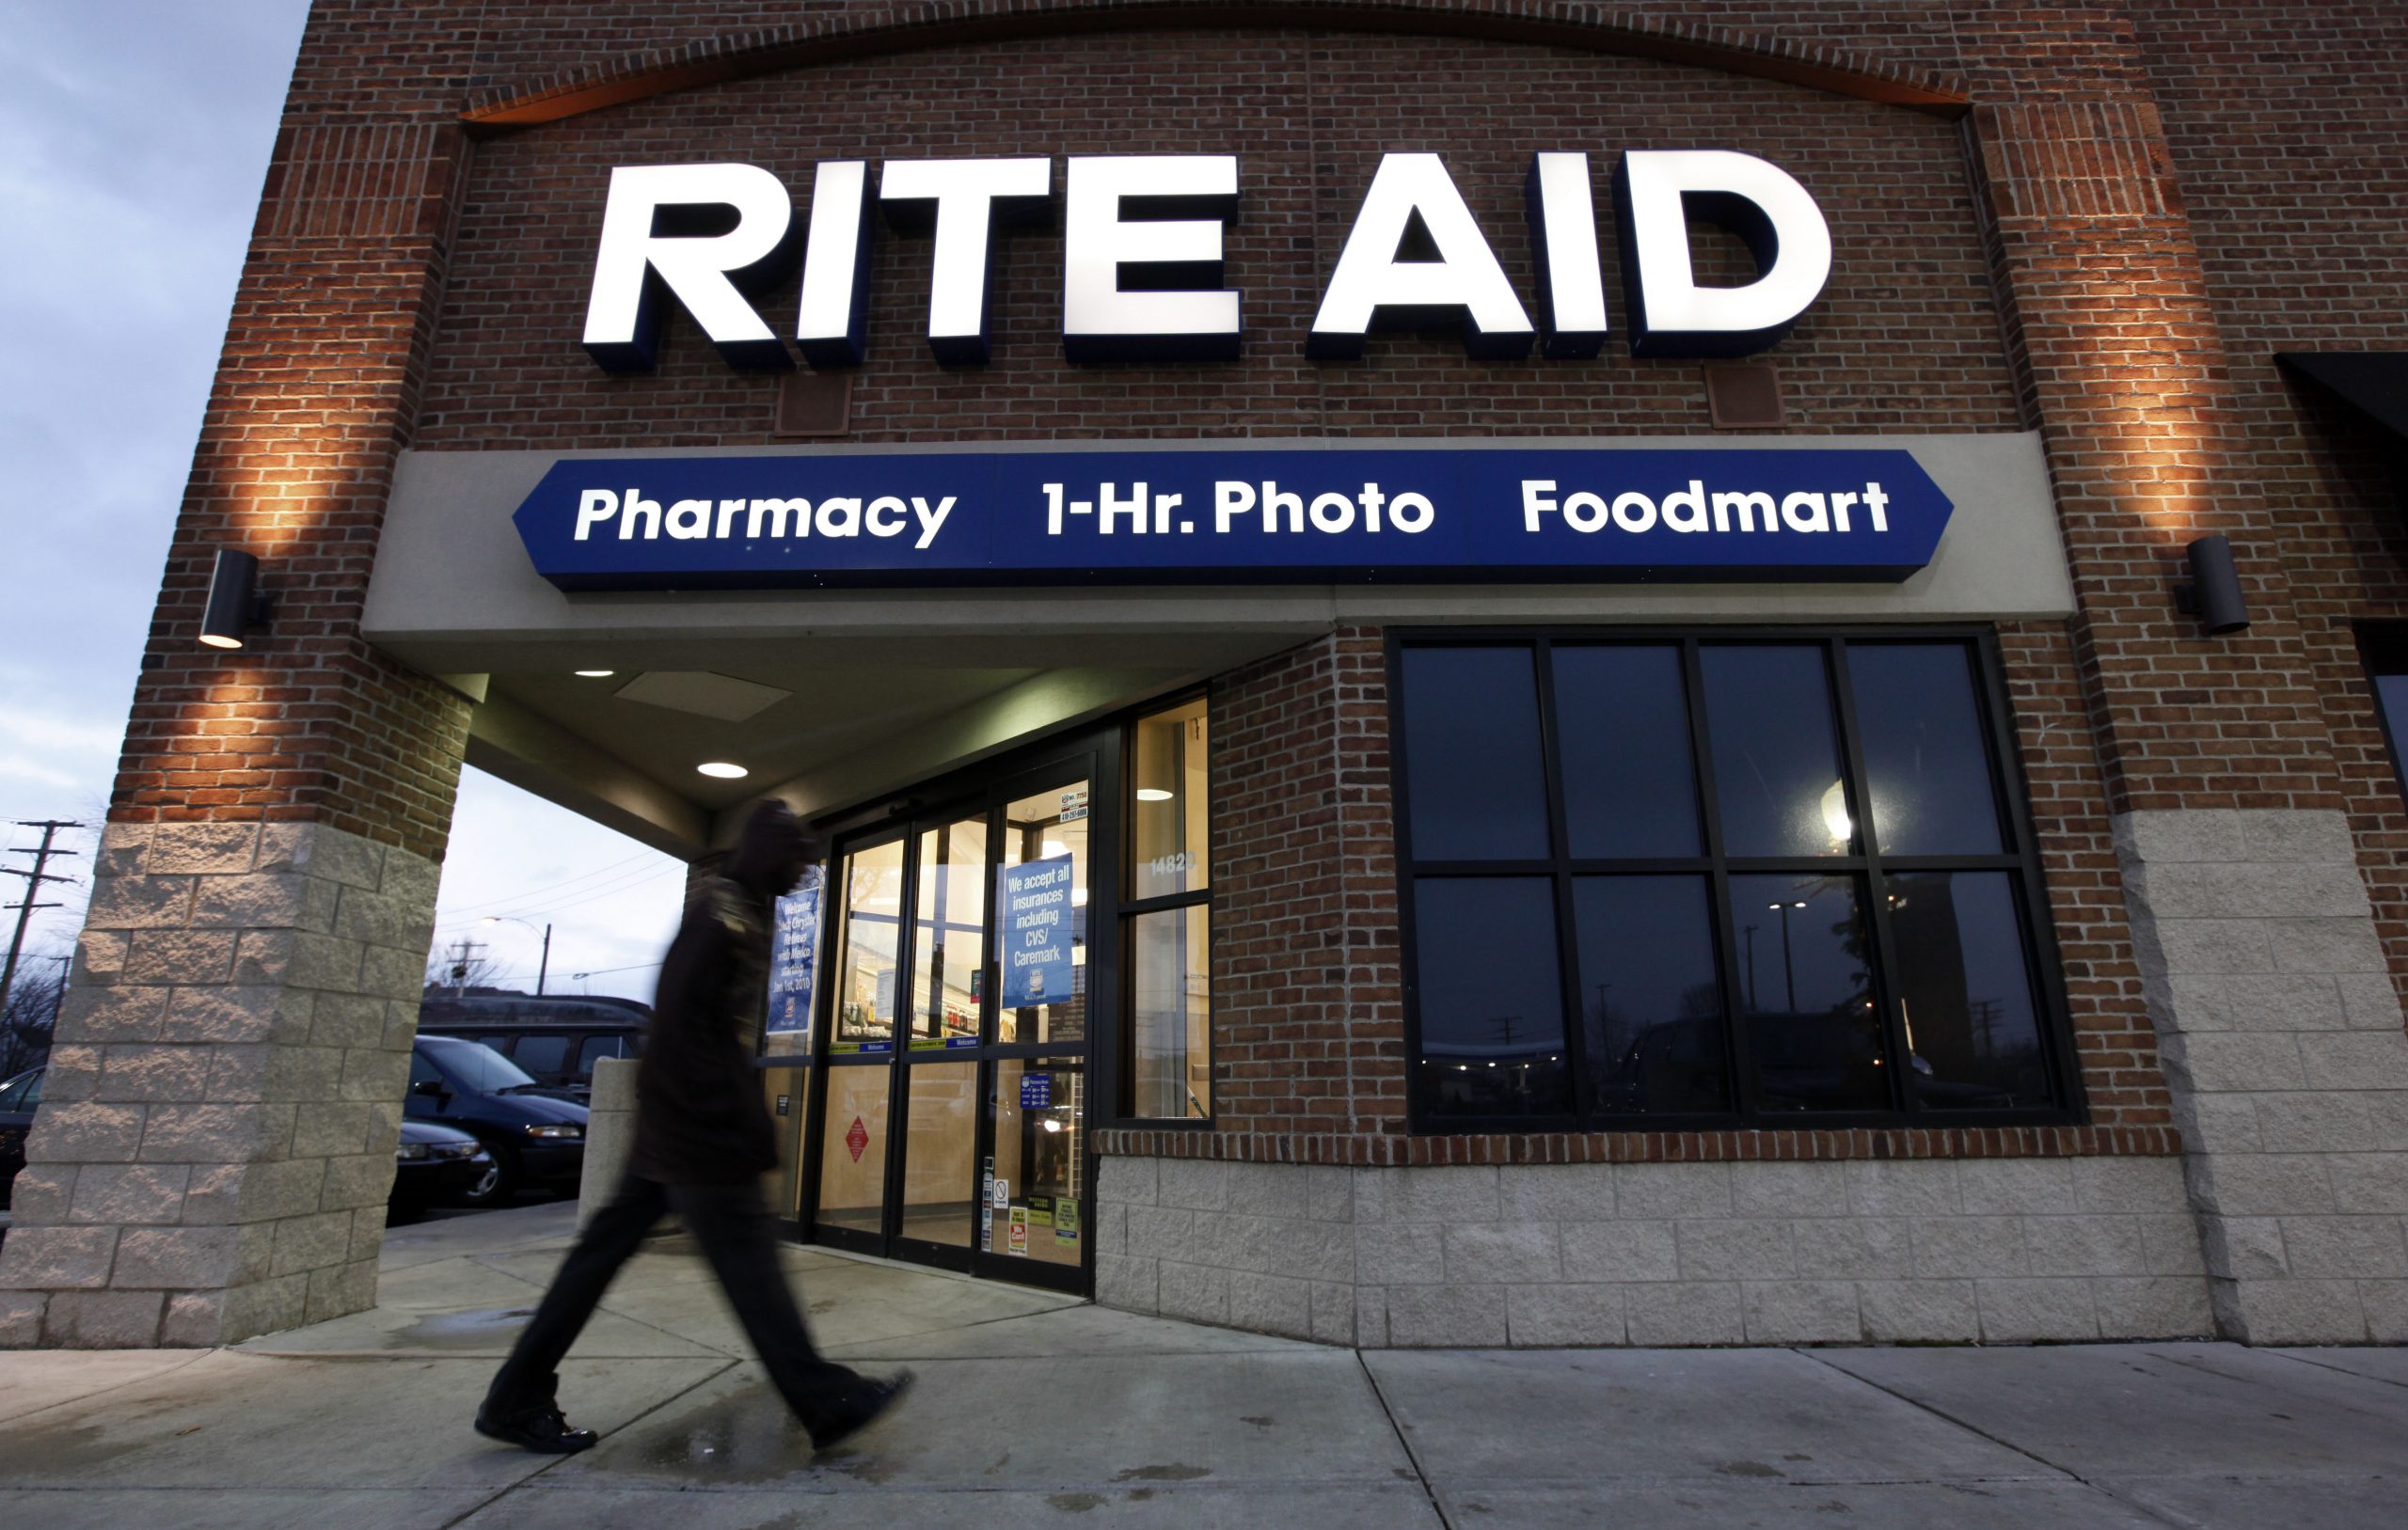 FILE - In this Dec. 15, 2009 file photo, a customer enters a Rite Aid store in Detroit. Rite Aid reports quarterly financial results on Thursday, June 19, 2014. (AP Photo/Paul Sancya, File)